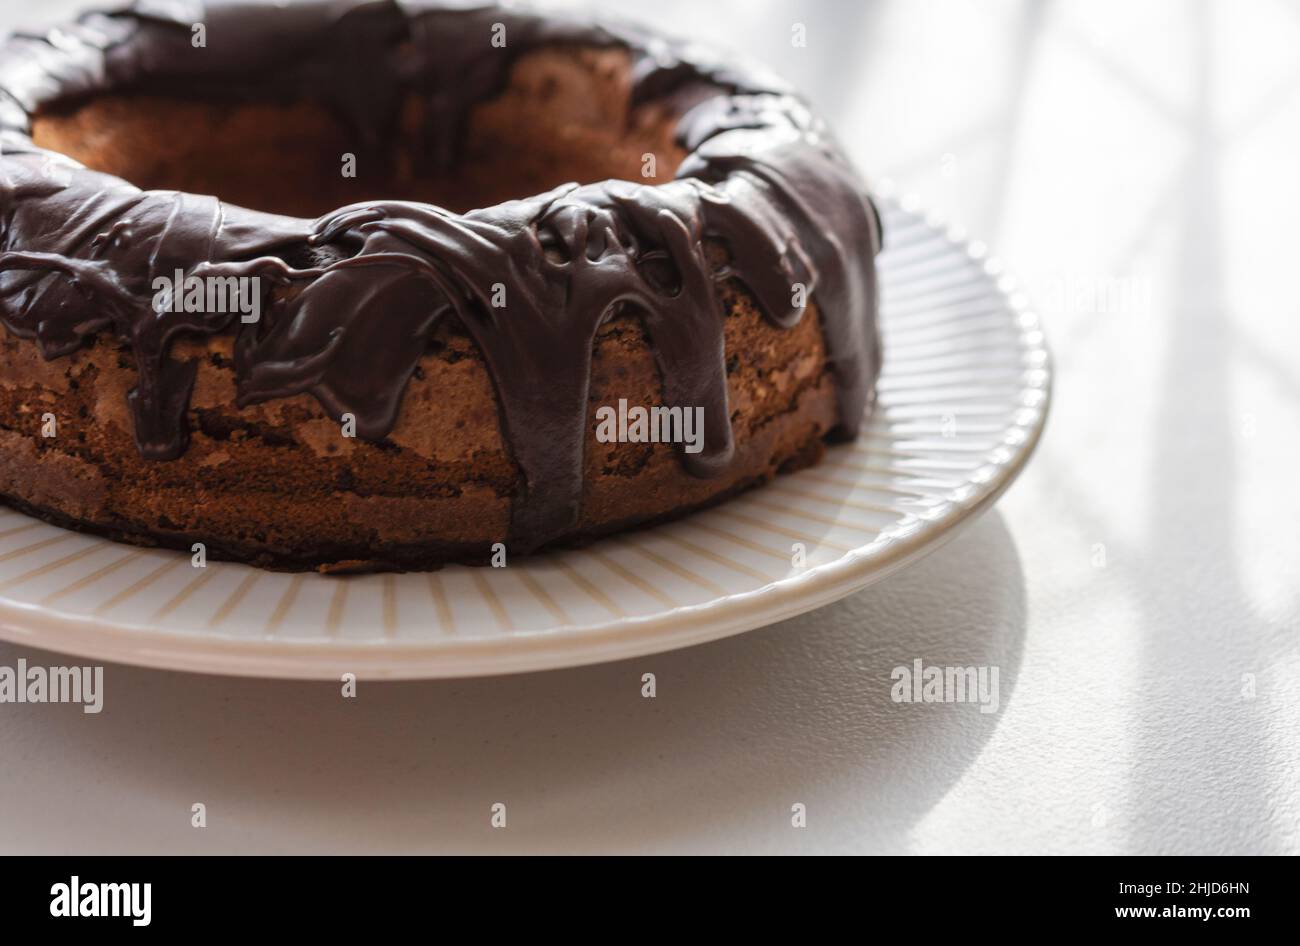 A whole chocolate bundt cake with fudge glaze.  Backlight from natural window light off camera. Stock Photo